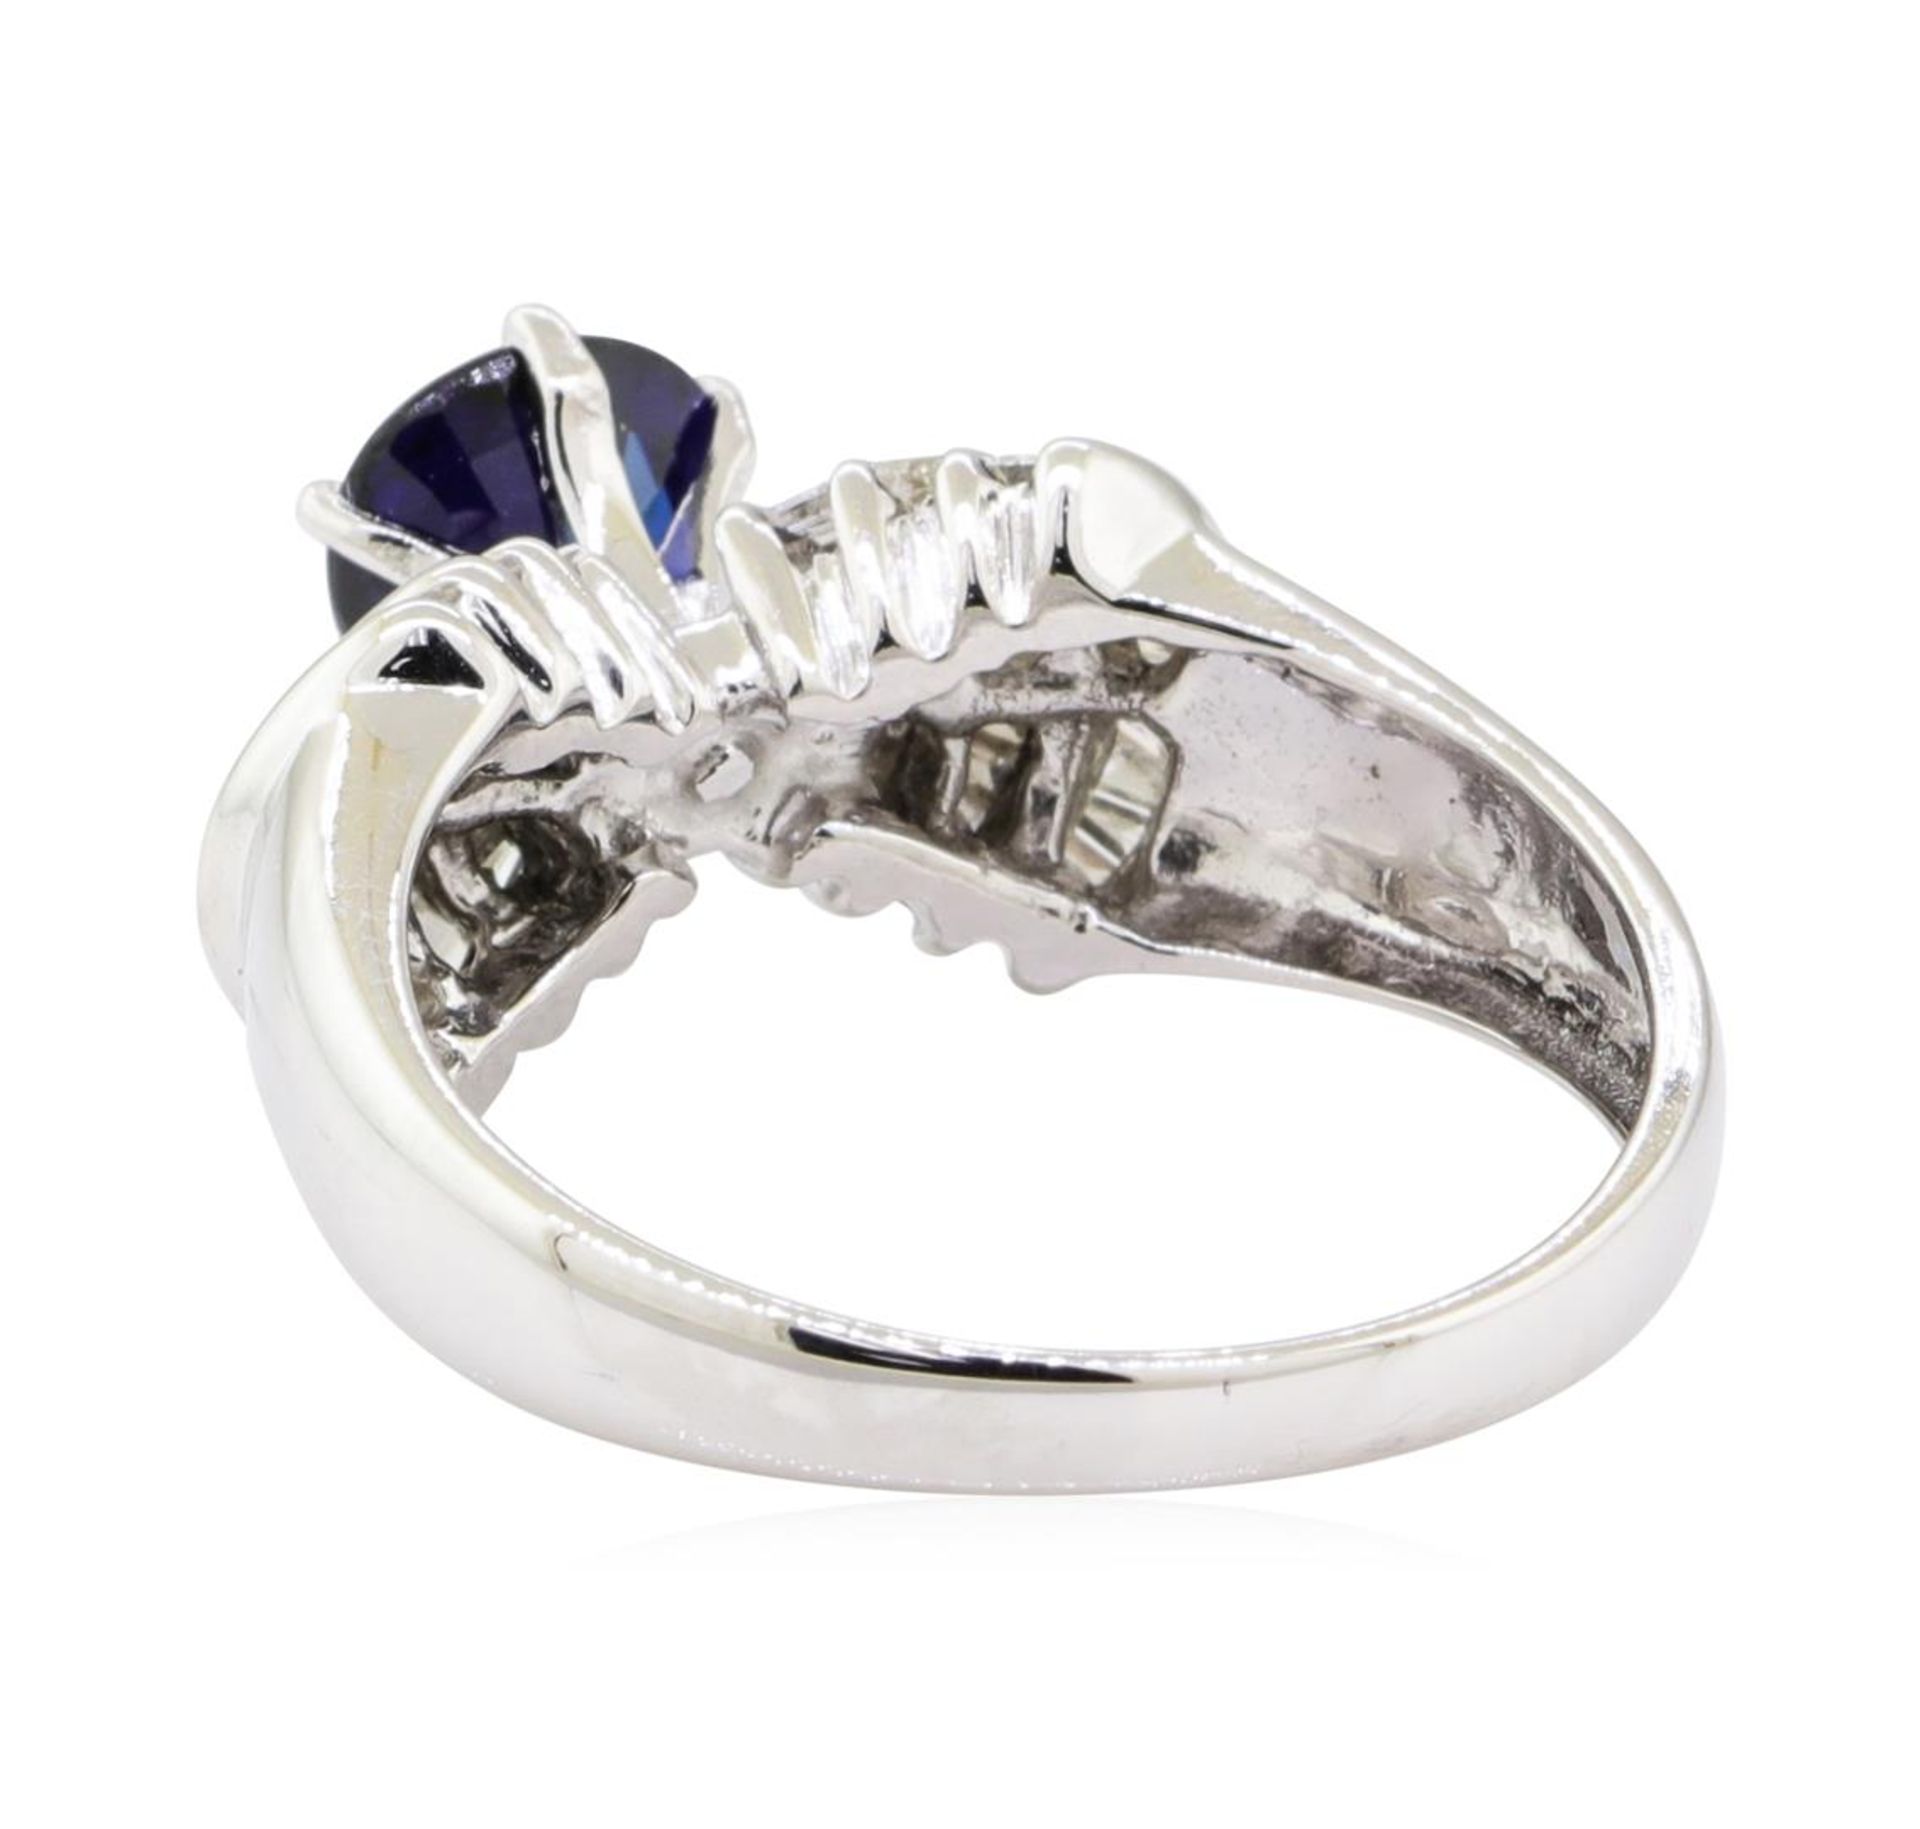 2.40 ctw Sapphire and Diamond Ring - 18KT White Gold - Image 3 of 5